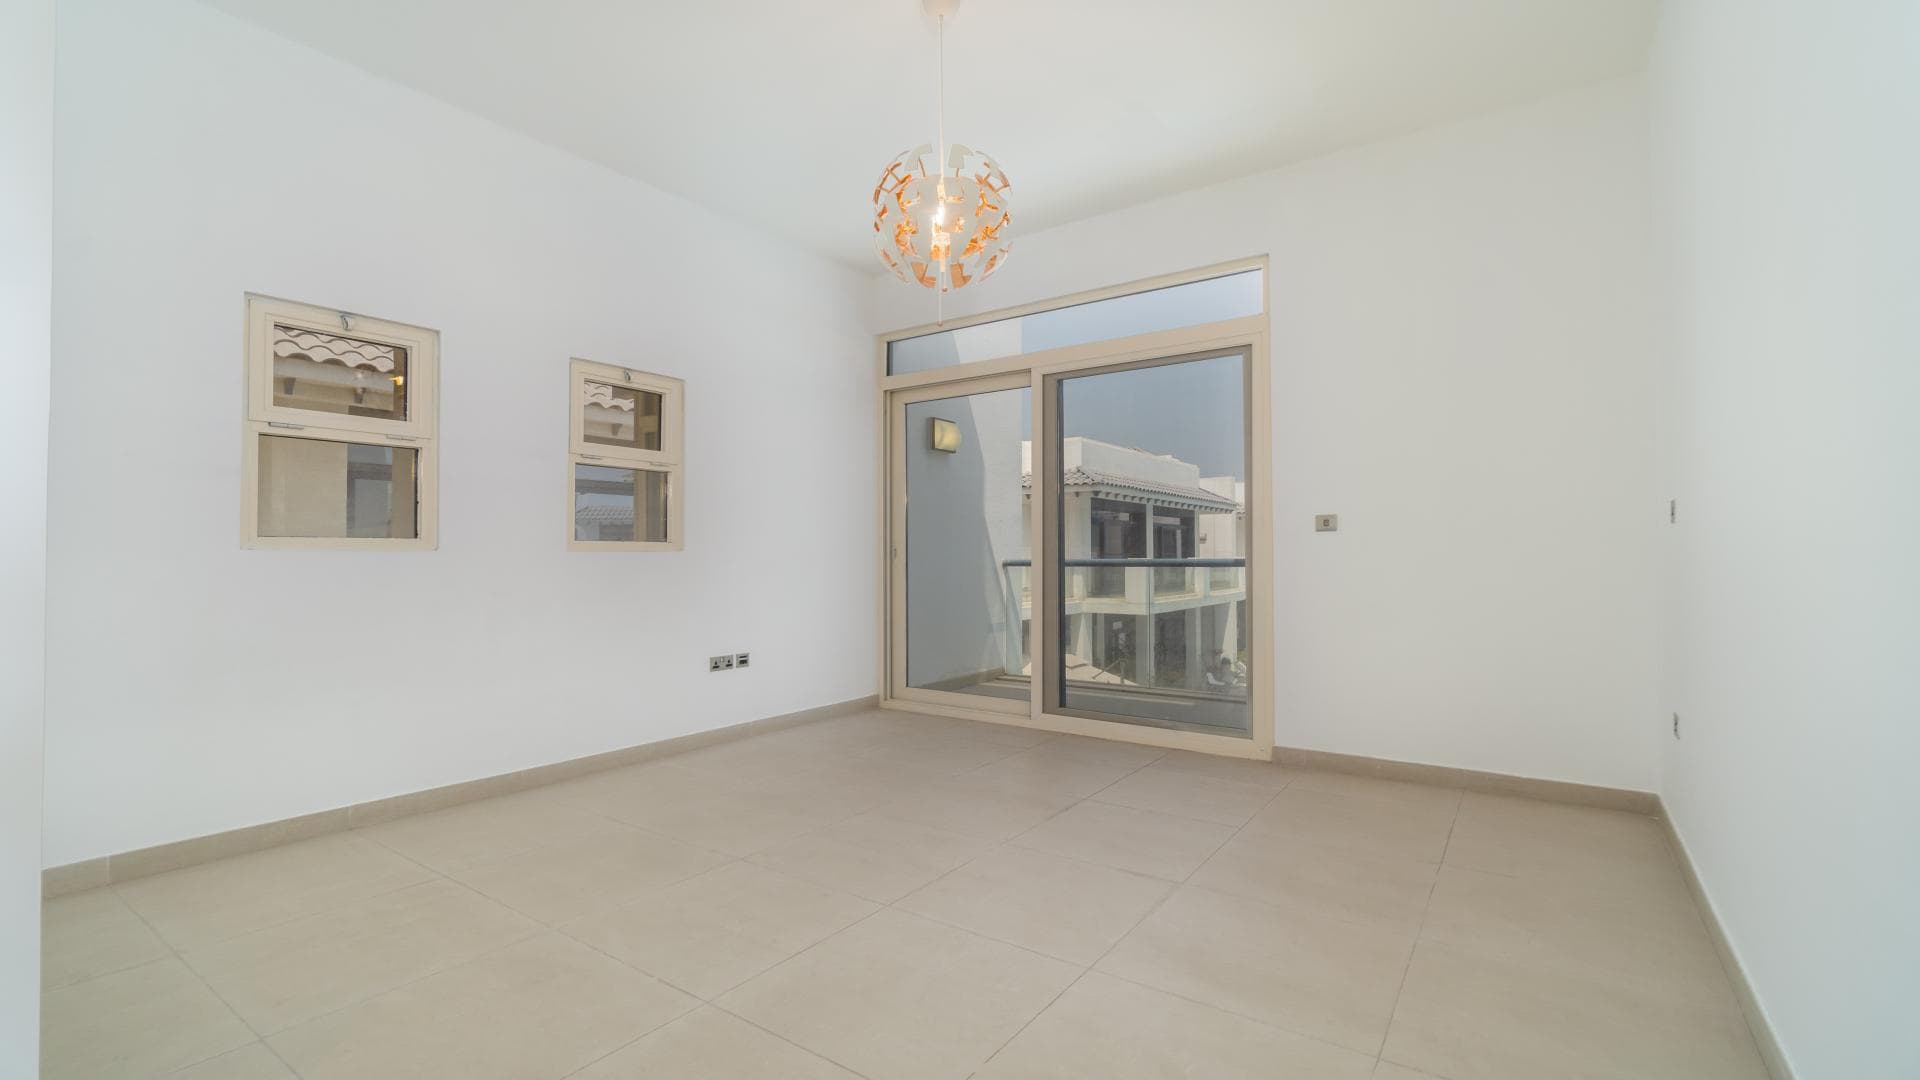 5 Bedroom Townhouse For Sale Palma Residences Lp14280 2c7992aa5dff7a00.jpg